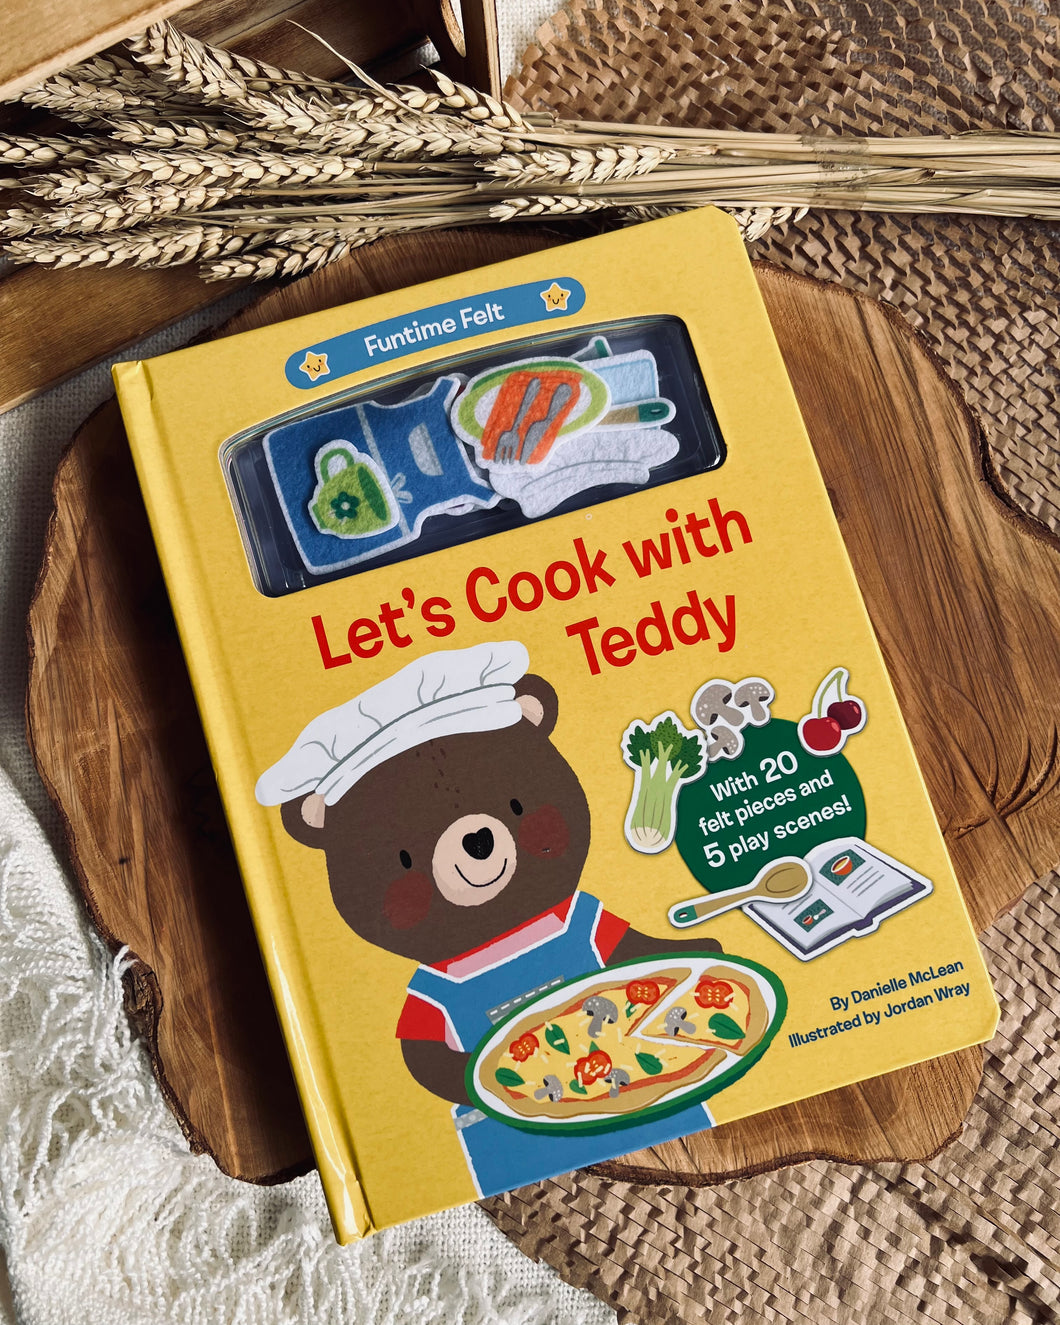 Let's Cook with Teddy